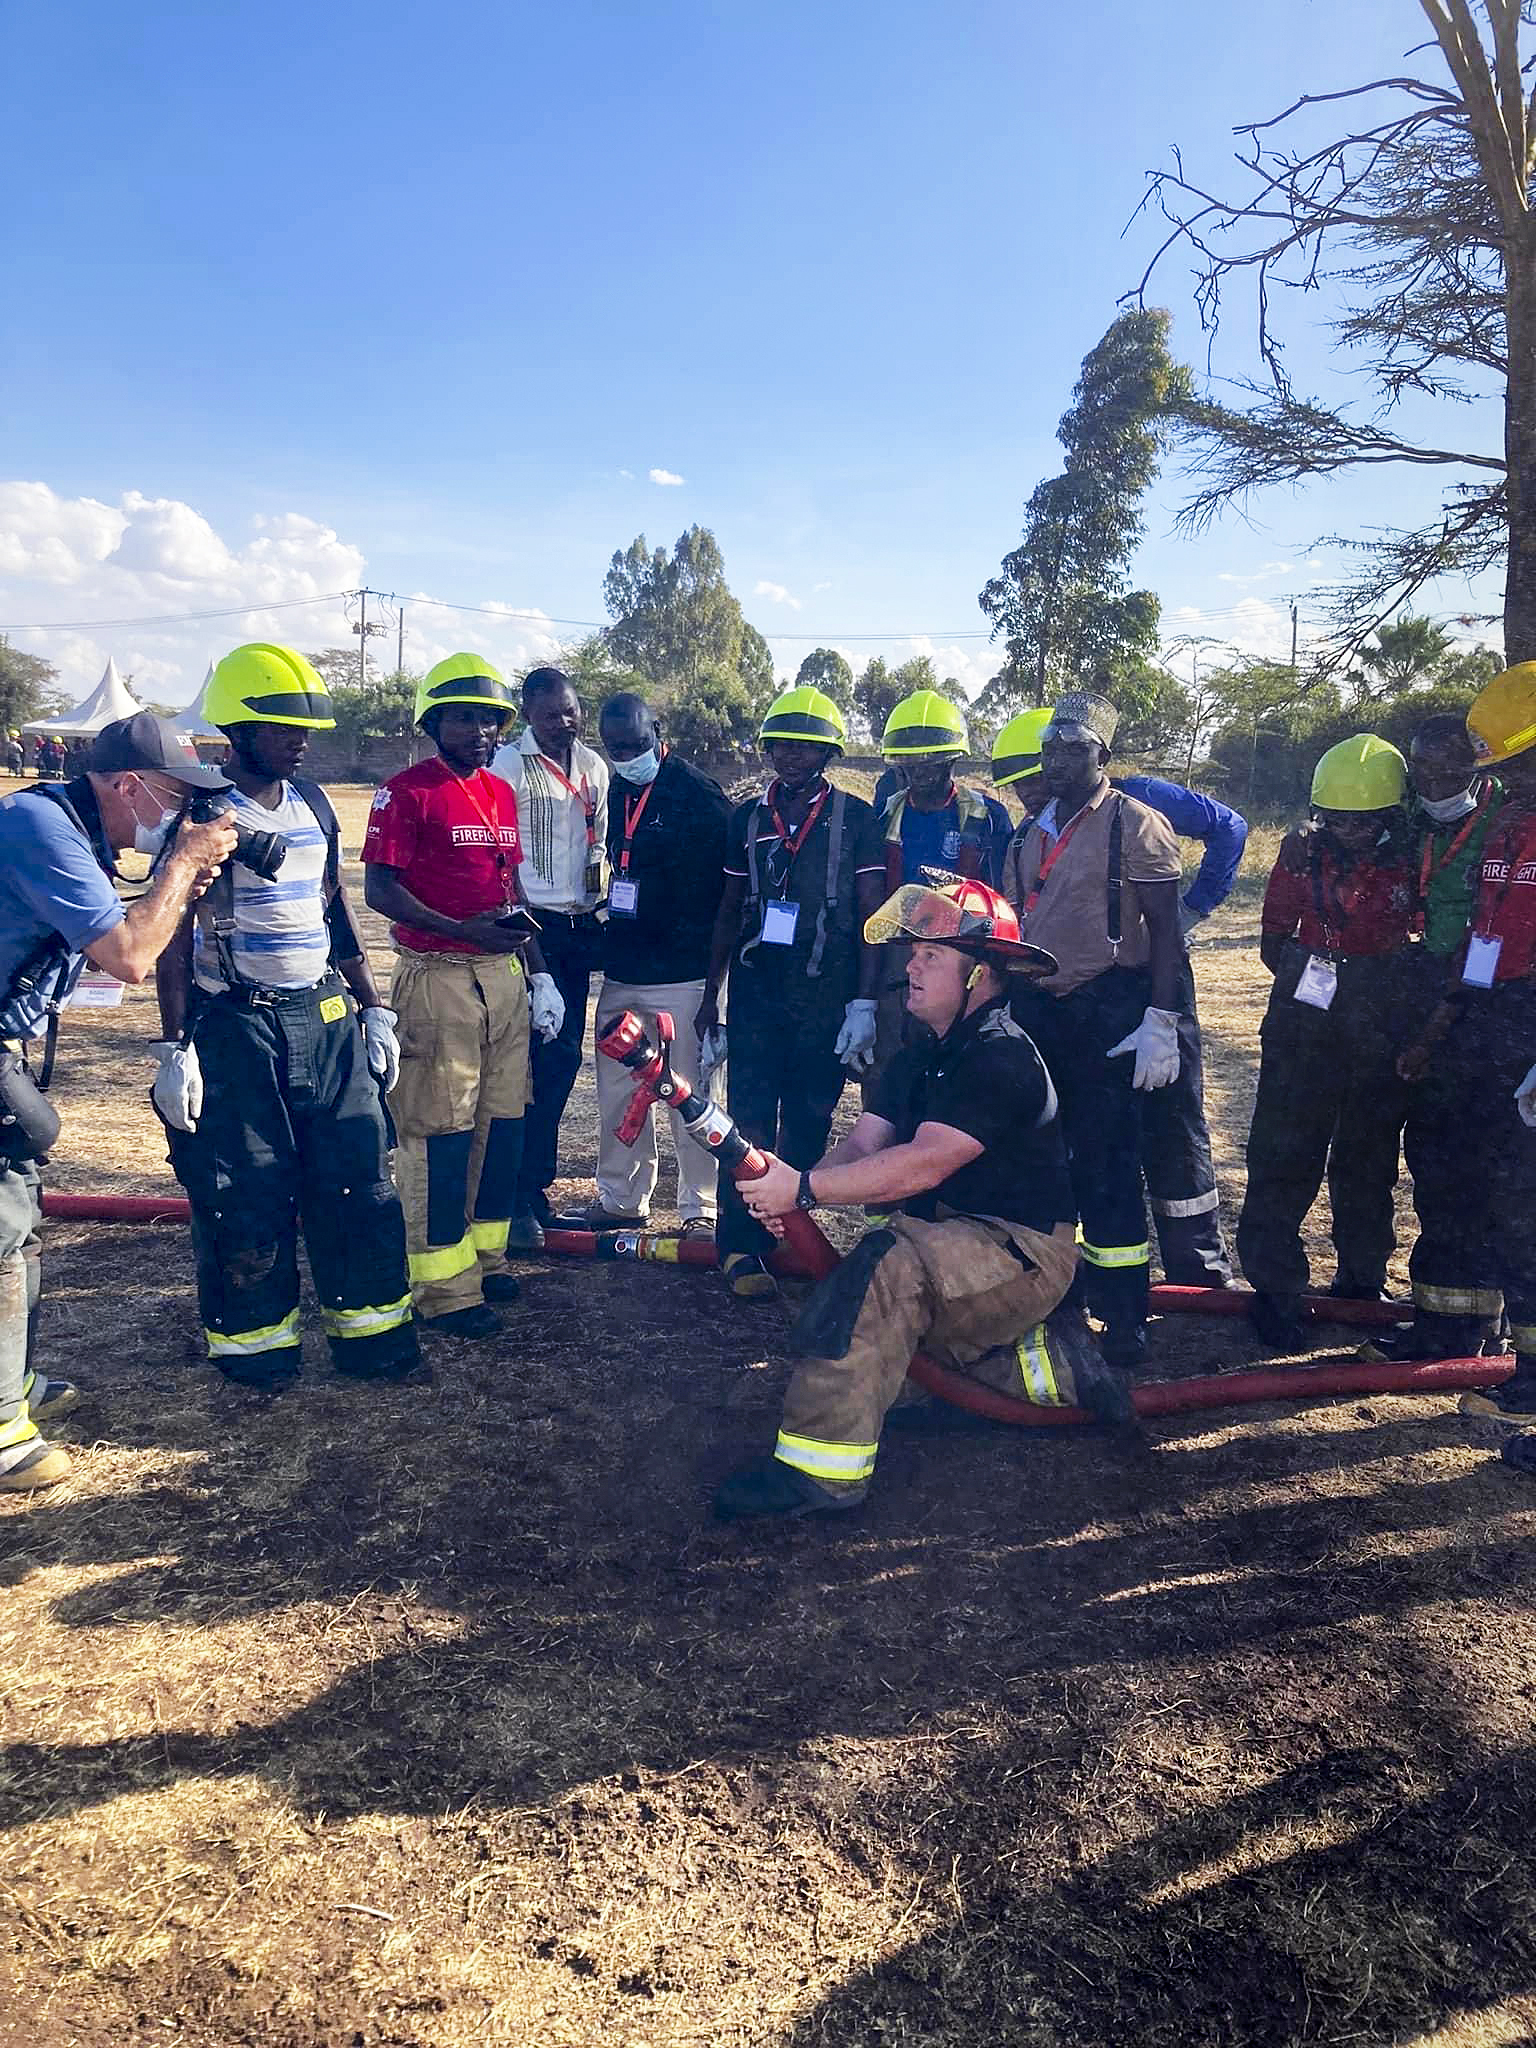 East Hampton Fire Department firefighter Michael Heller photographs Texas firefighter John Moore as he helps to train Kenyan firefighters with hose-handling techniques during the Africa Fire Mission trip to Kenya, Nairobi.